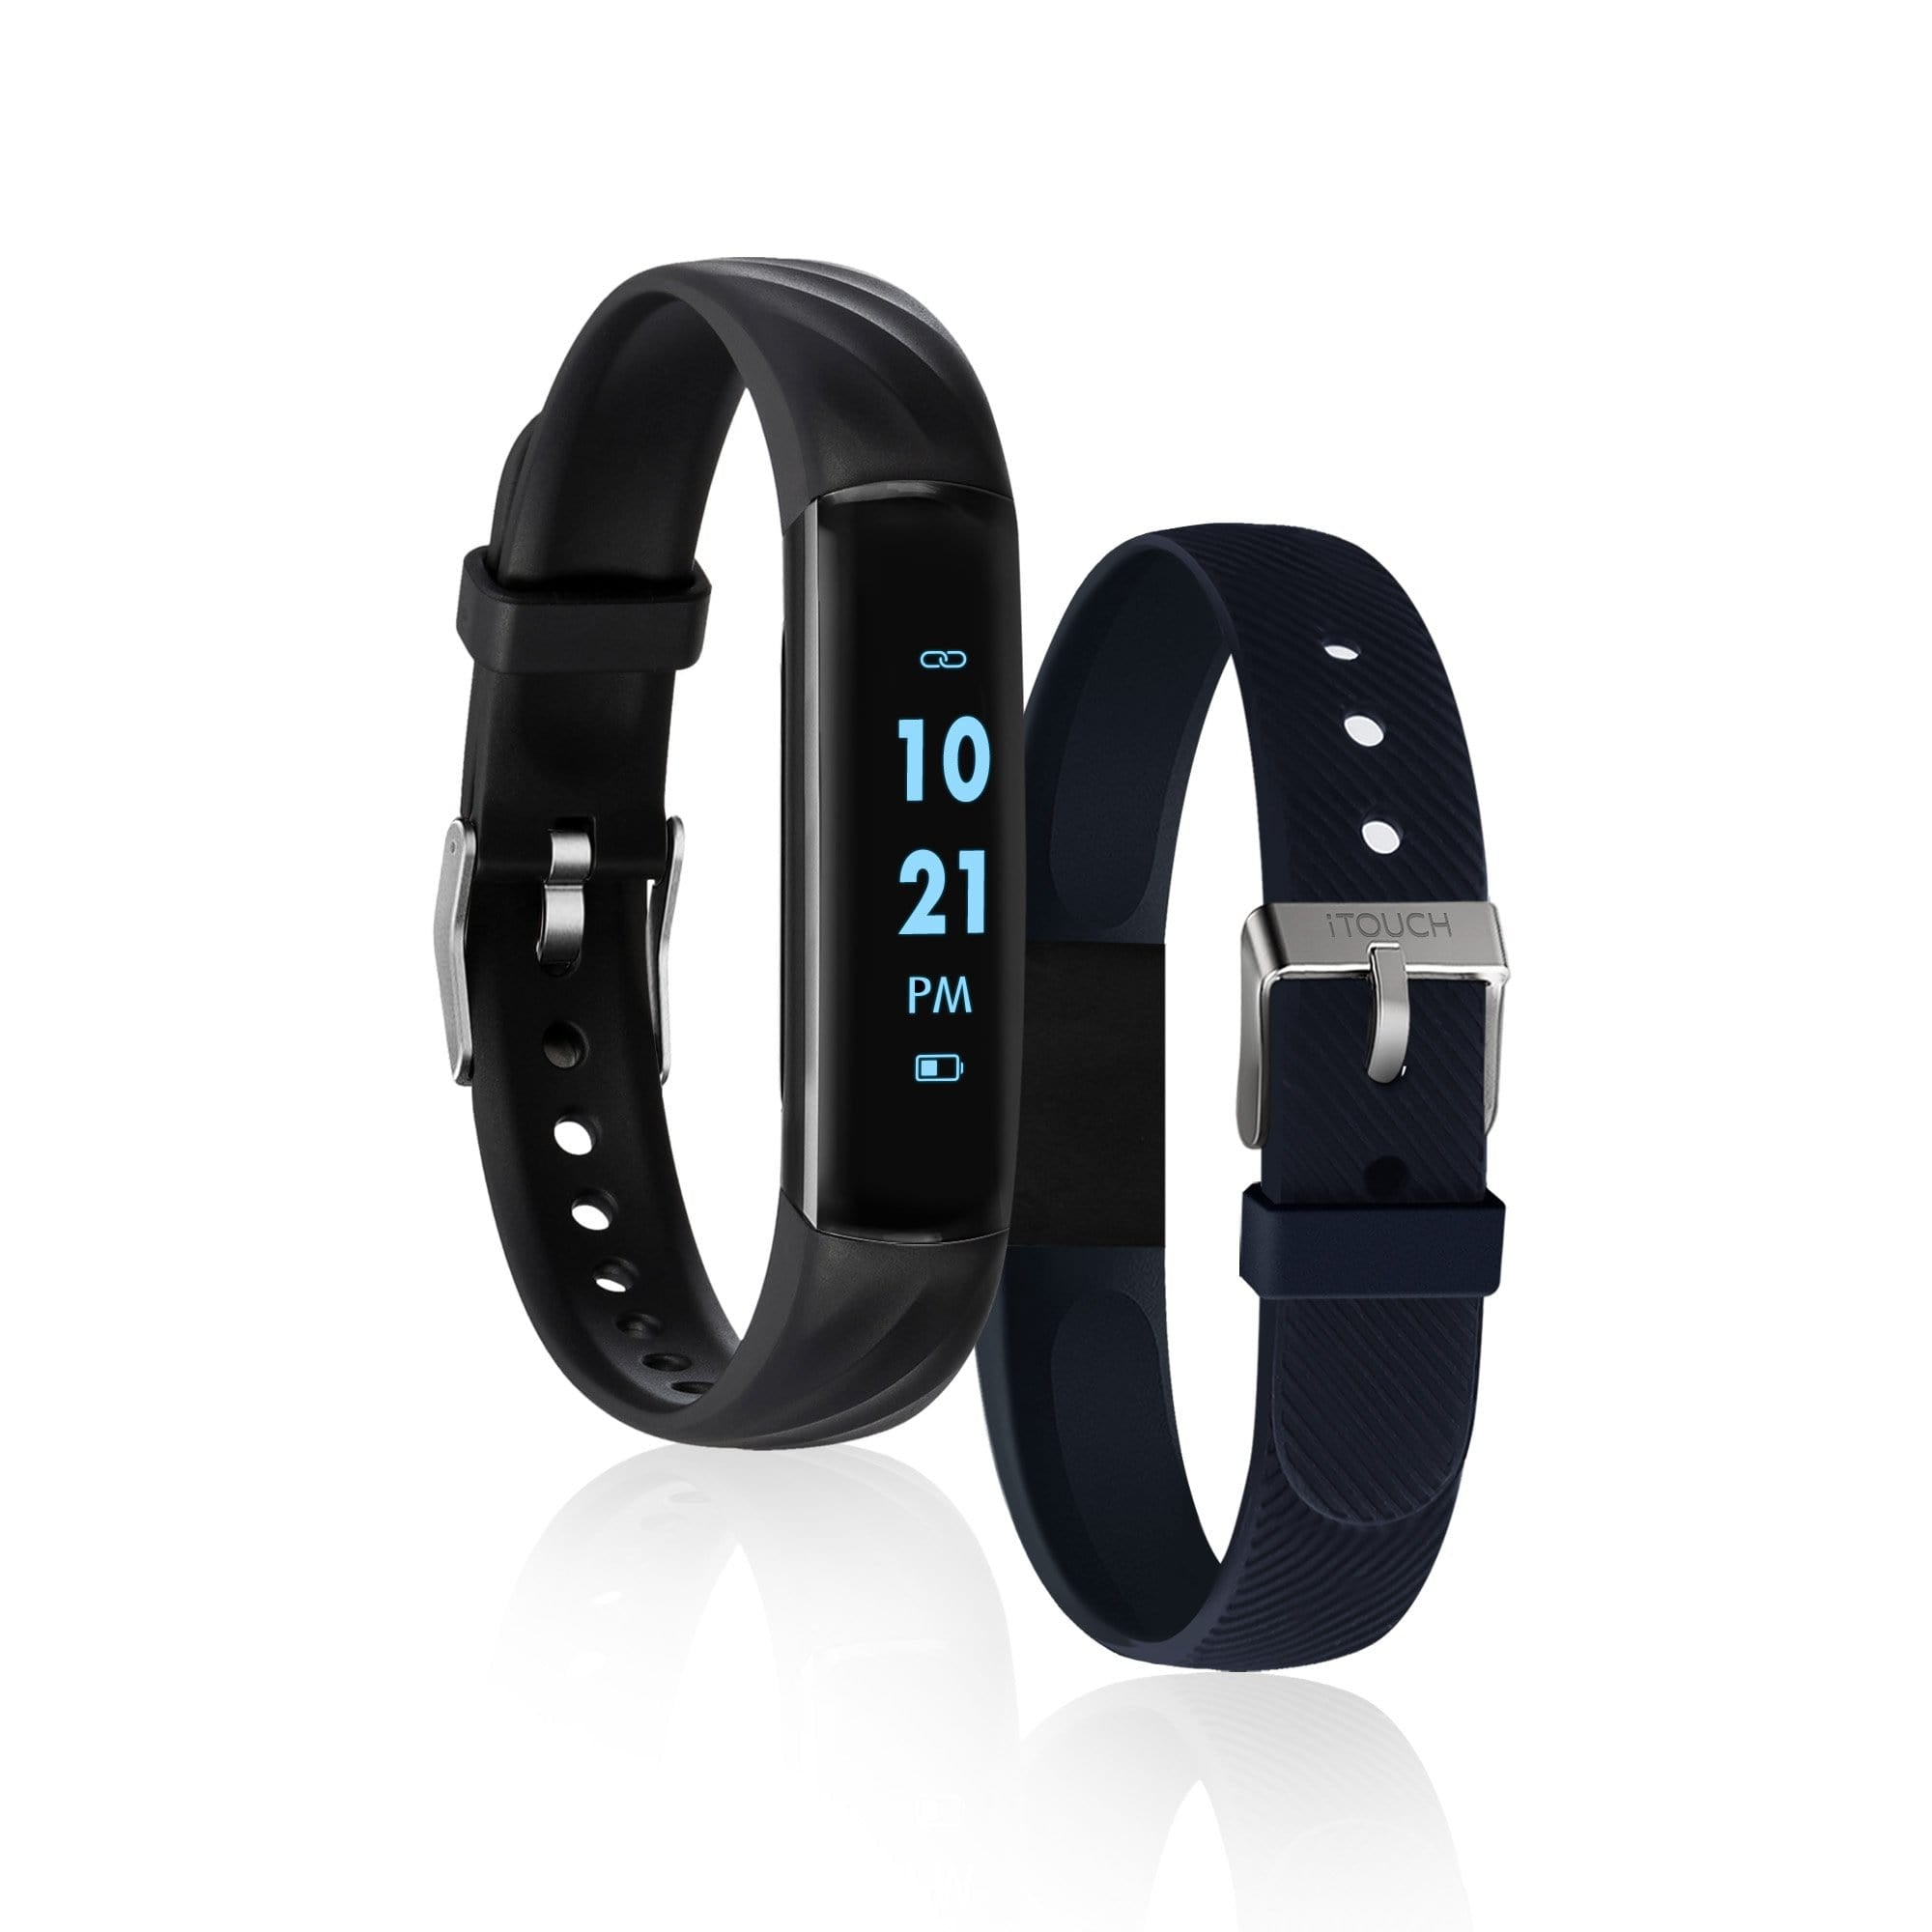 FITPRO Wearables Fitness Tracker FitTouch Slim Fitness Tracker: Black/Navy Interchangeable Straps